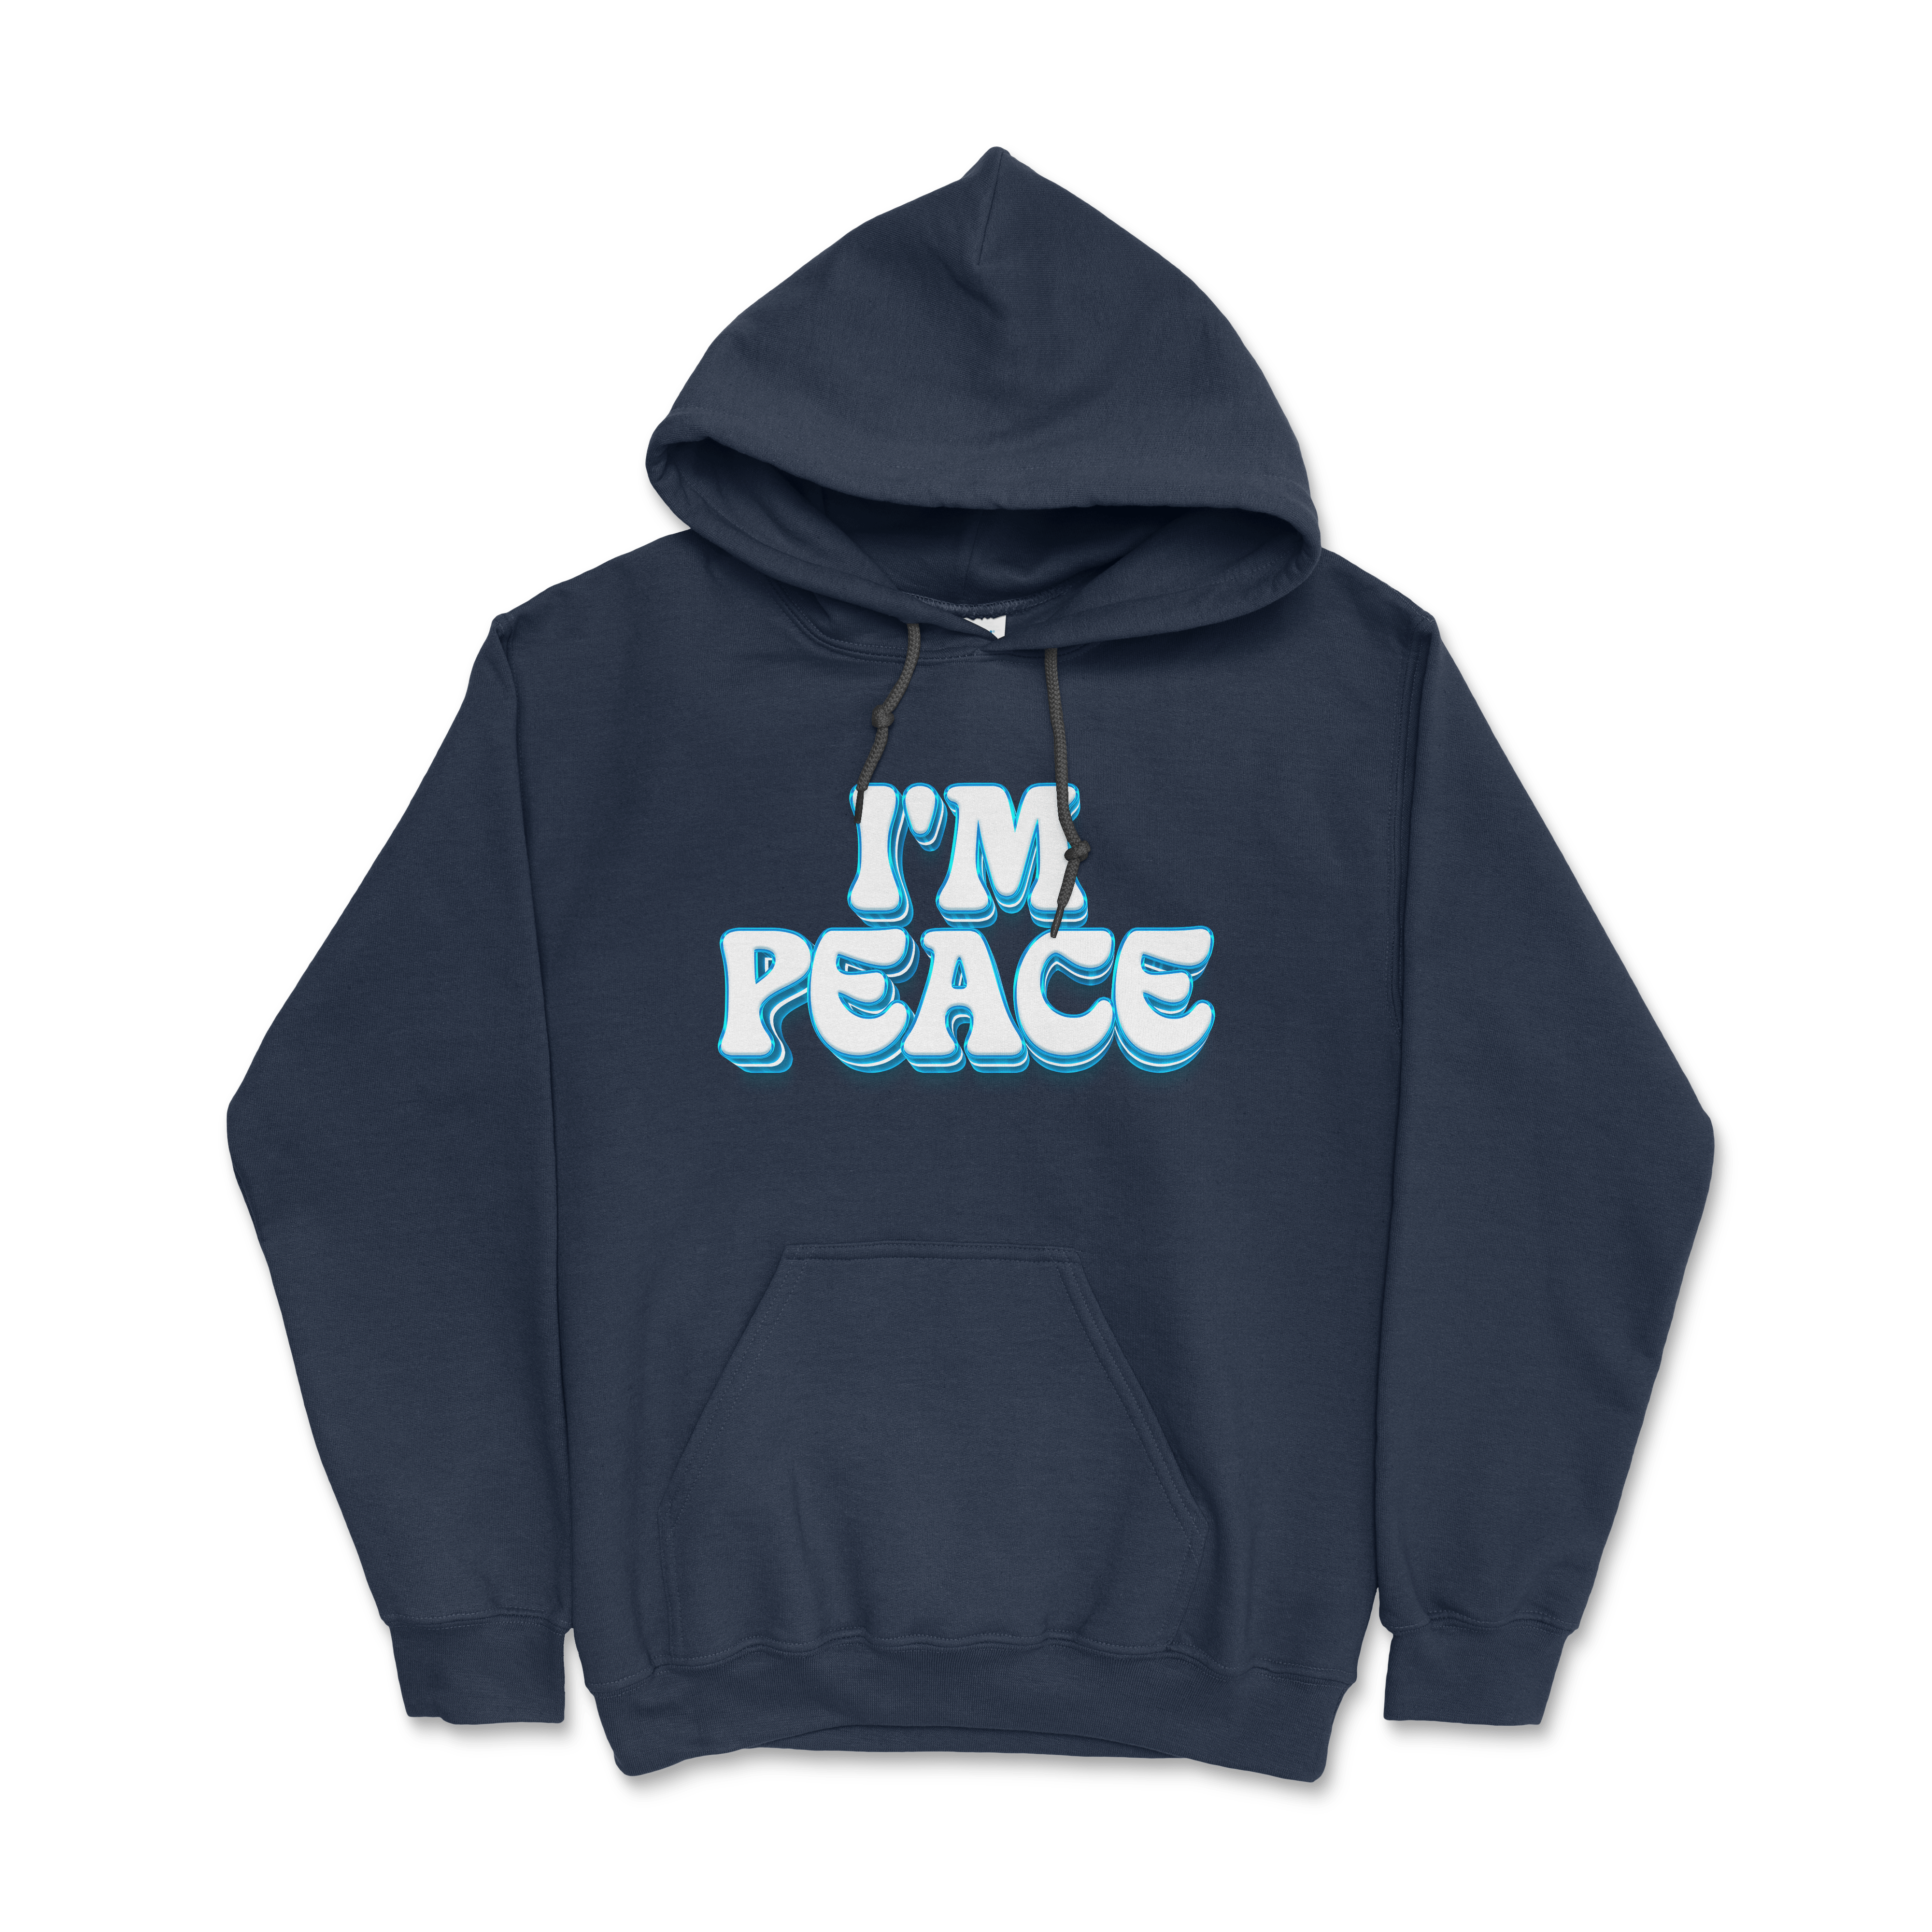 I Come In Peace & I'm Peace | Unisex Essential hoodies | Midnight Navy